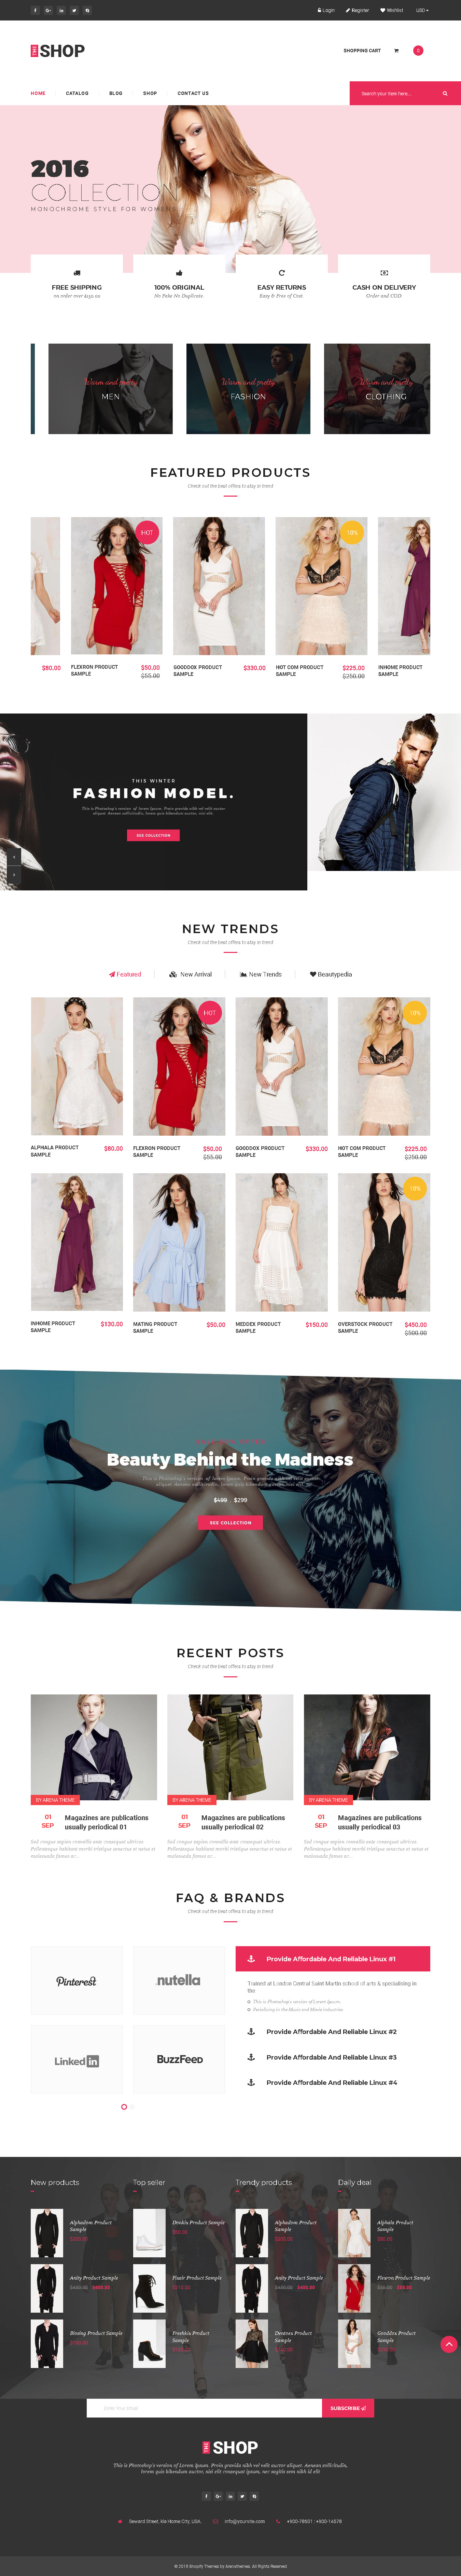 Top Shopify Theme For Large Inventory Fashion Store - Clothing & Fashion Responsive Shopify Theme - TheShop